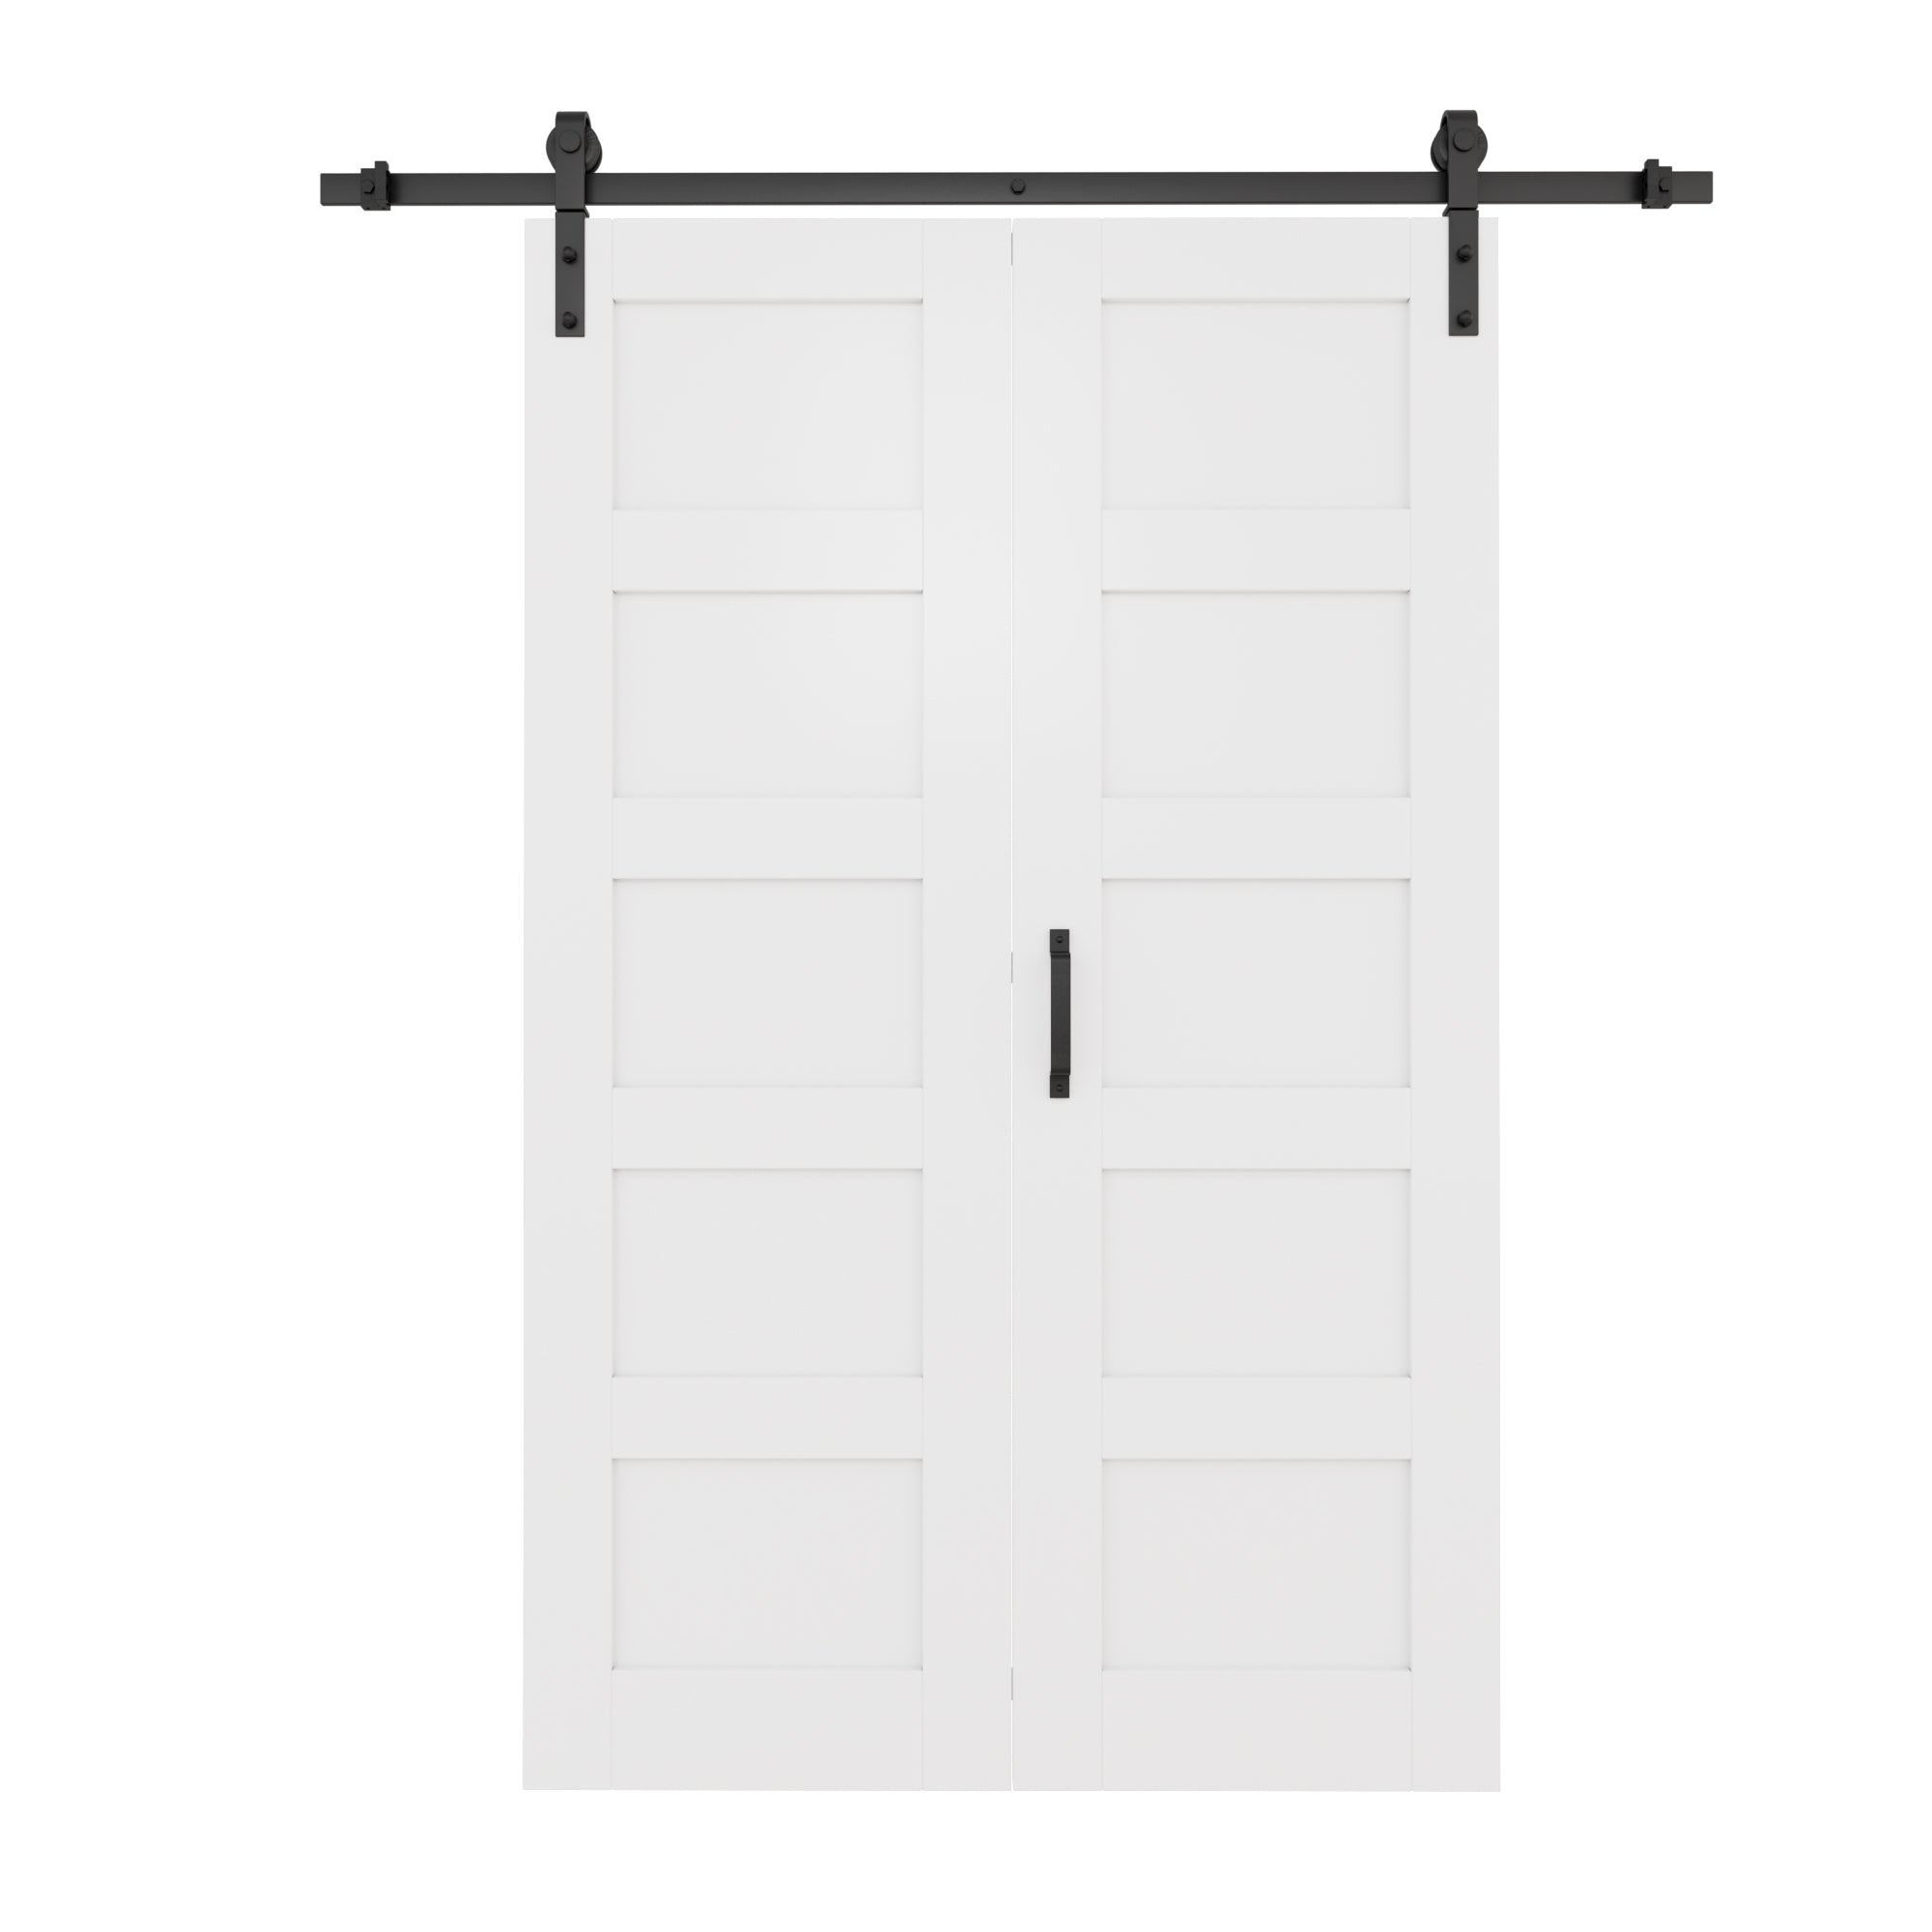 Ark Design 5-Lite Bifold Barn Door MDF Wood & PVC Covered Finished, with Hardware Kit & Handle & Floor Guide, White